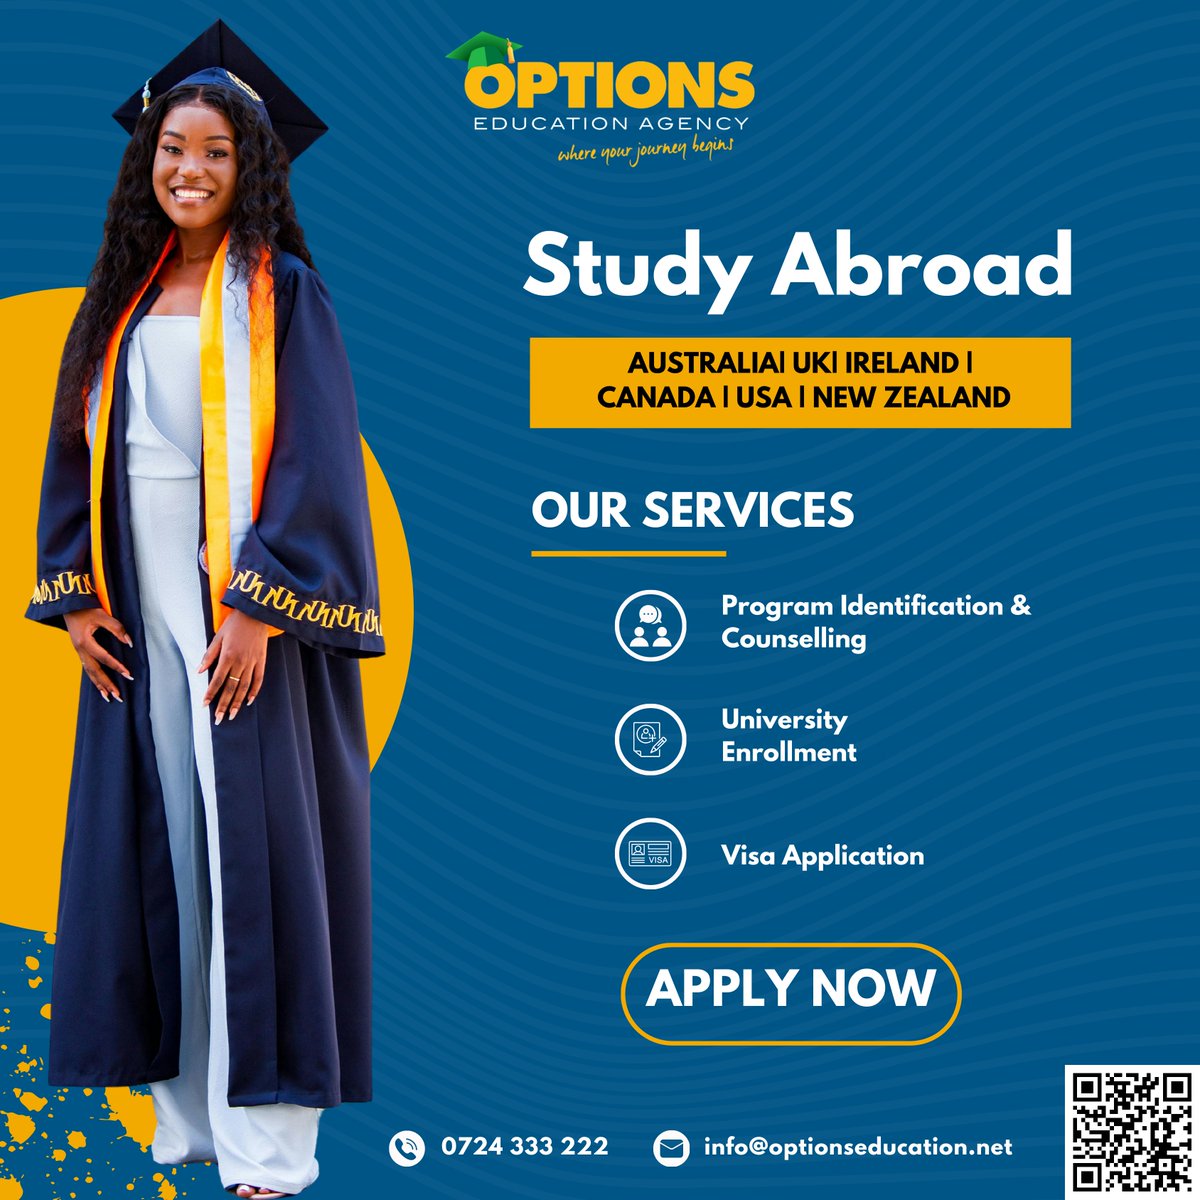 Dream Big, Study Abroad! Apply Now with us for Australia, UK, Canada, Ireland Opportunities! Call 0724 333 222 for more information. #studyabroad